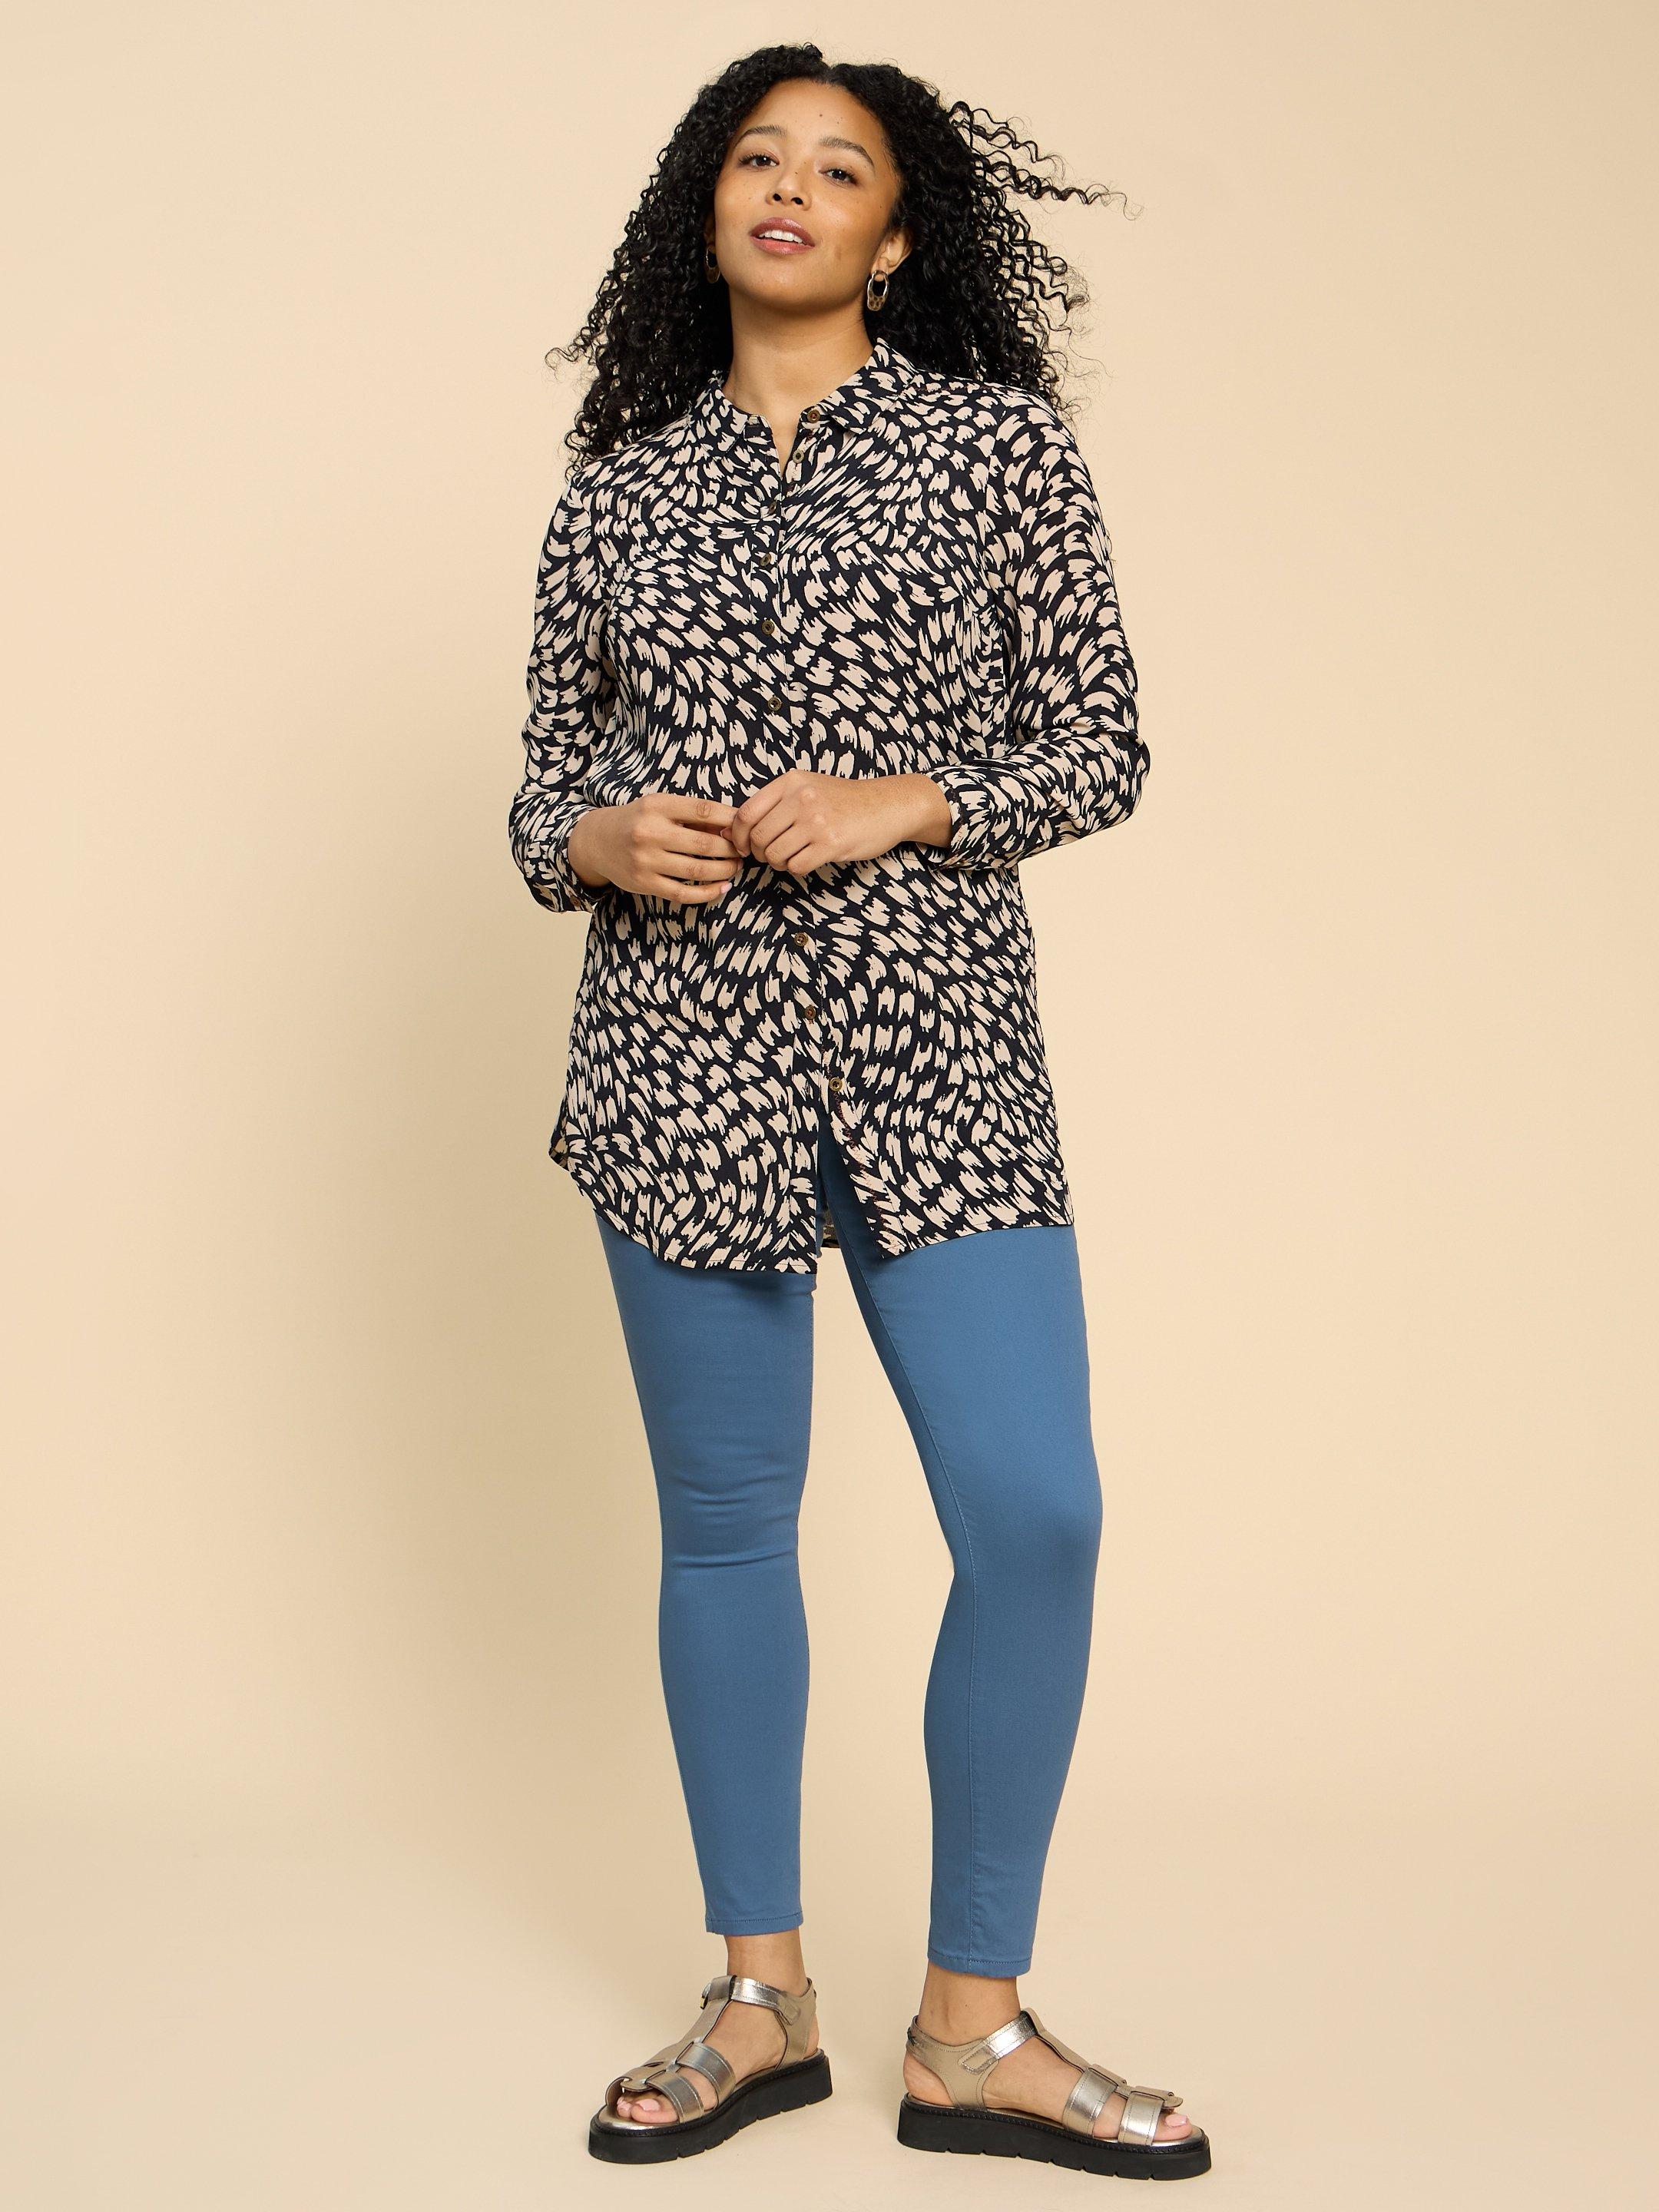 White Stuff Janey Crop Jeggings - Mid Teal - Home in the Highlands